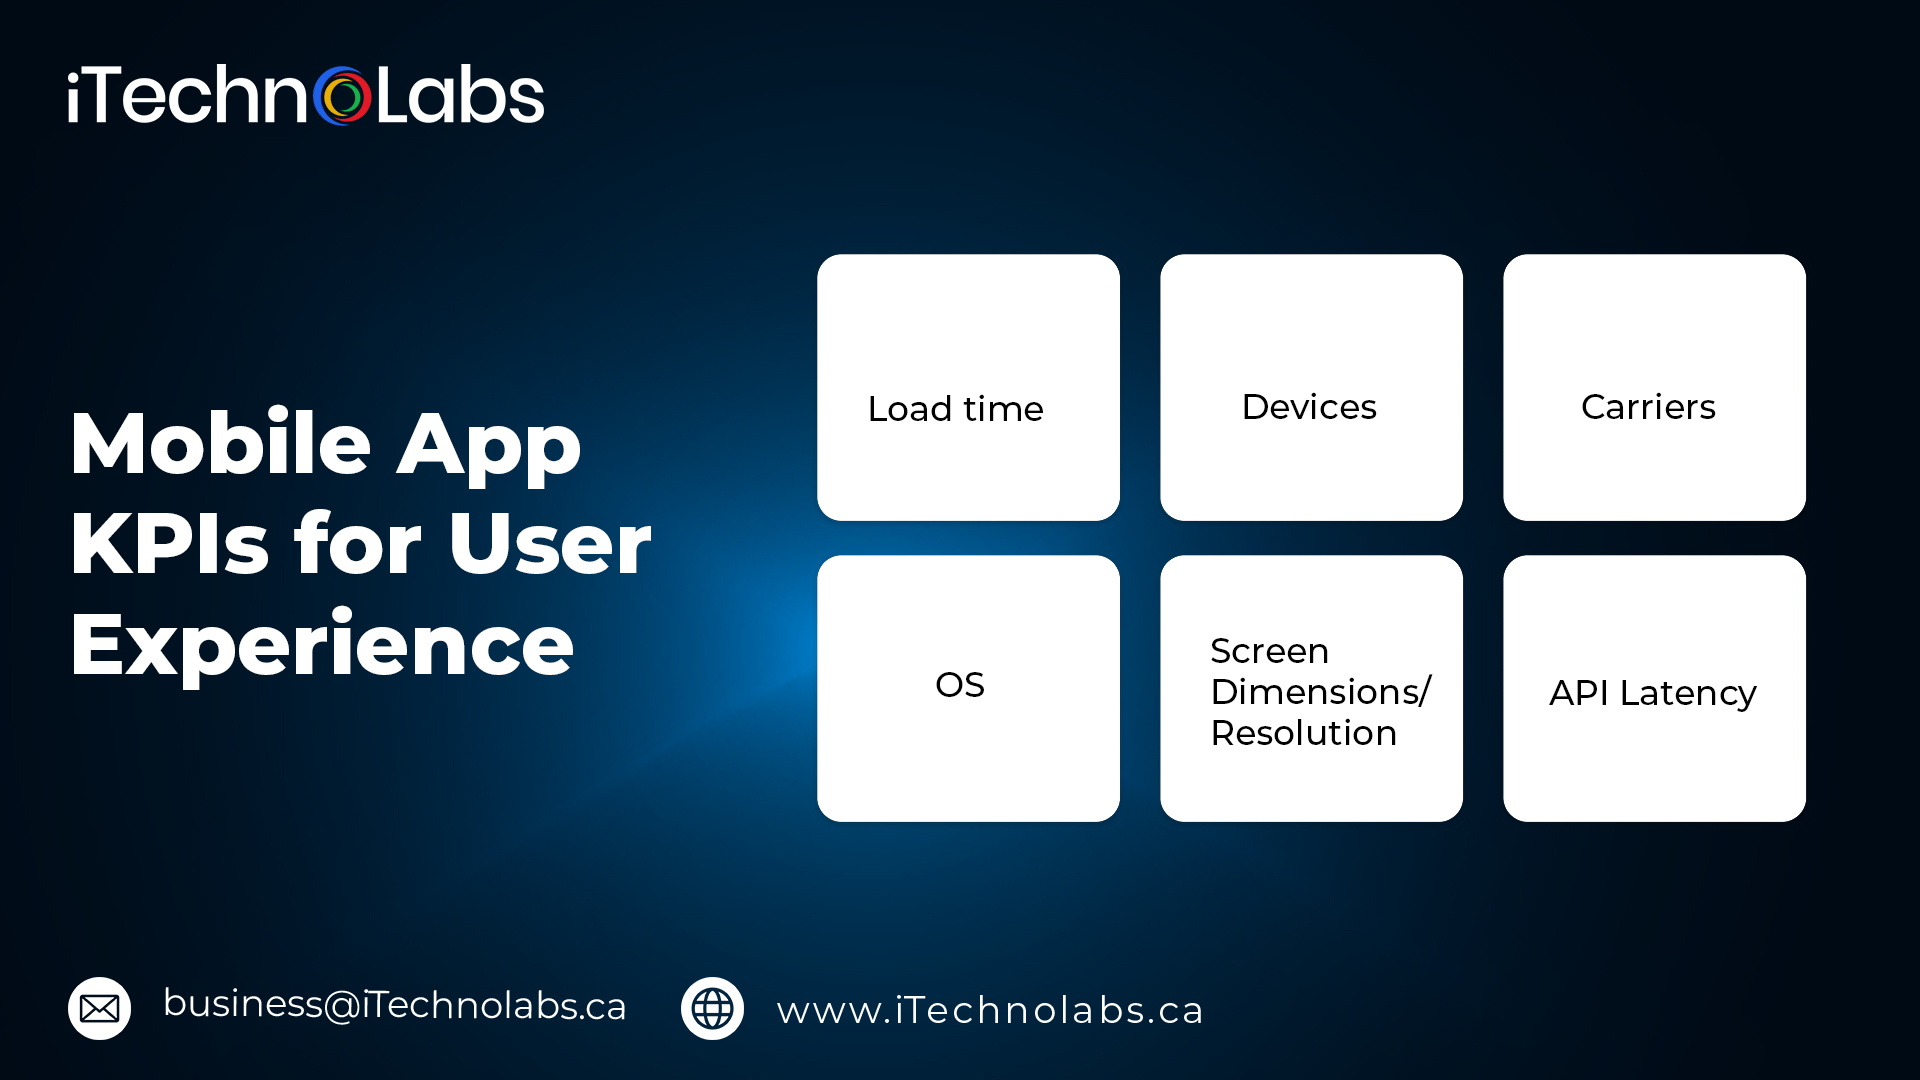 mobile app kpis for user experience itechnolabs